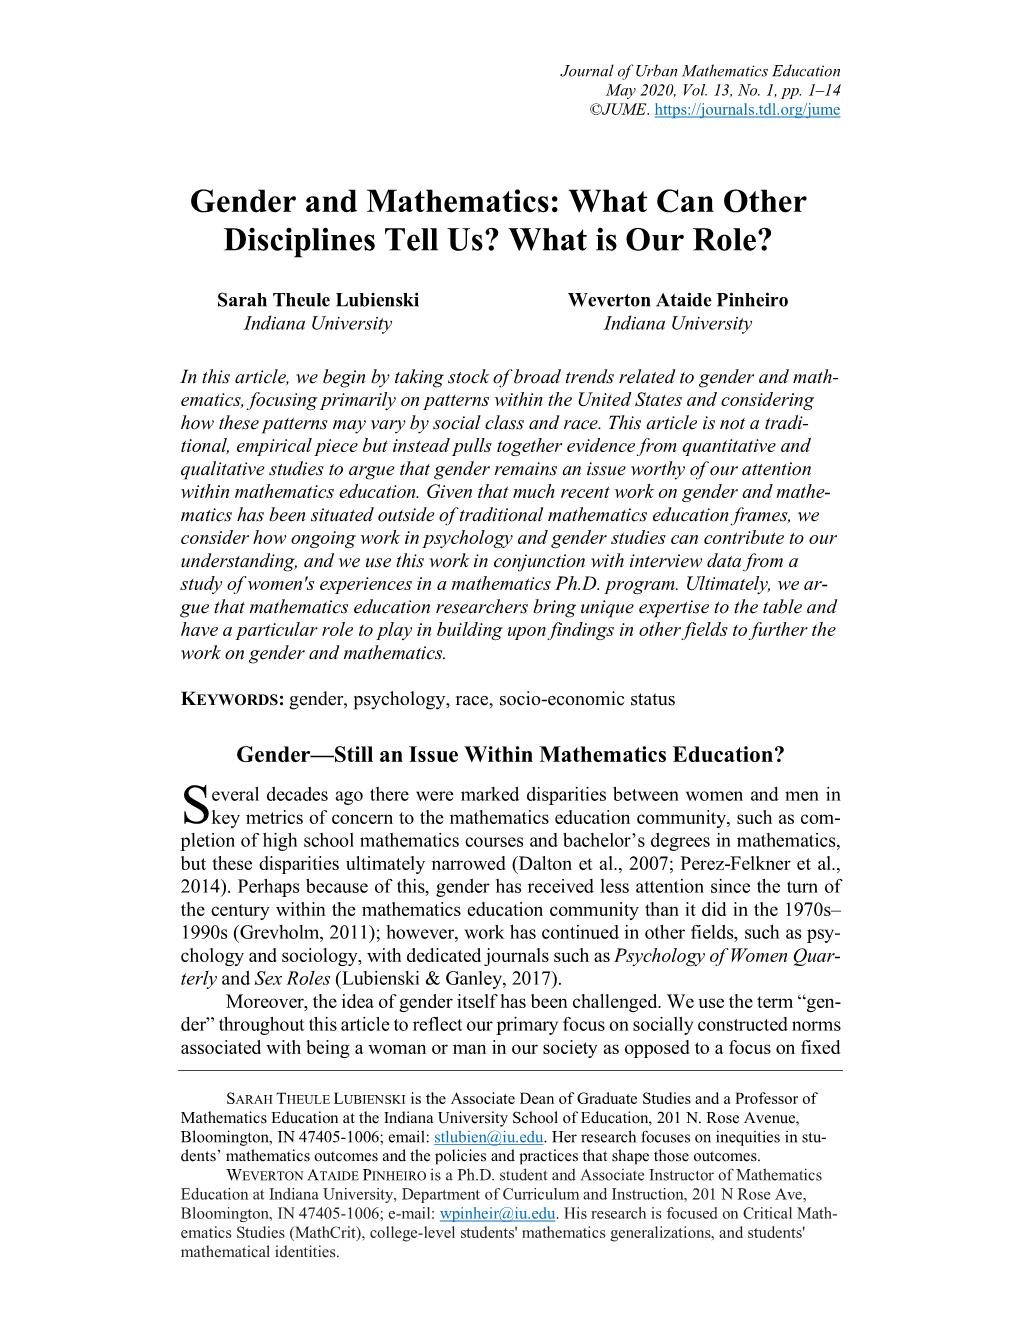 Gender and Mathematics: What Can Other Disciplines Tell Us? What Is Our Role?